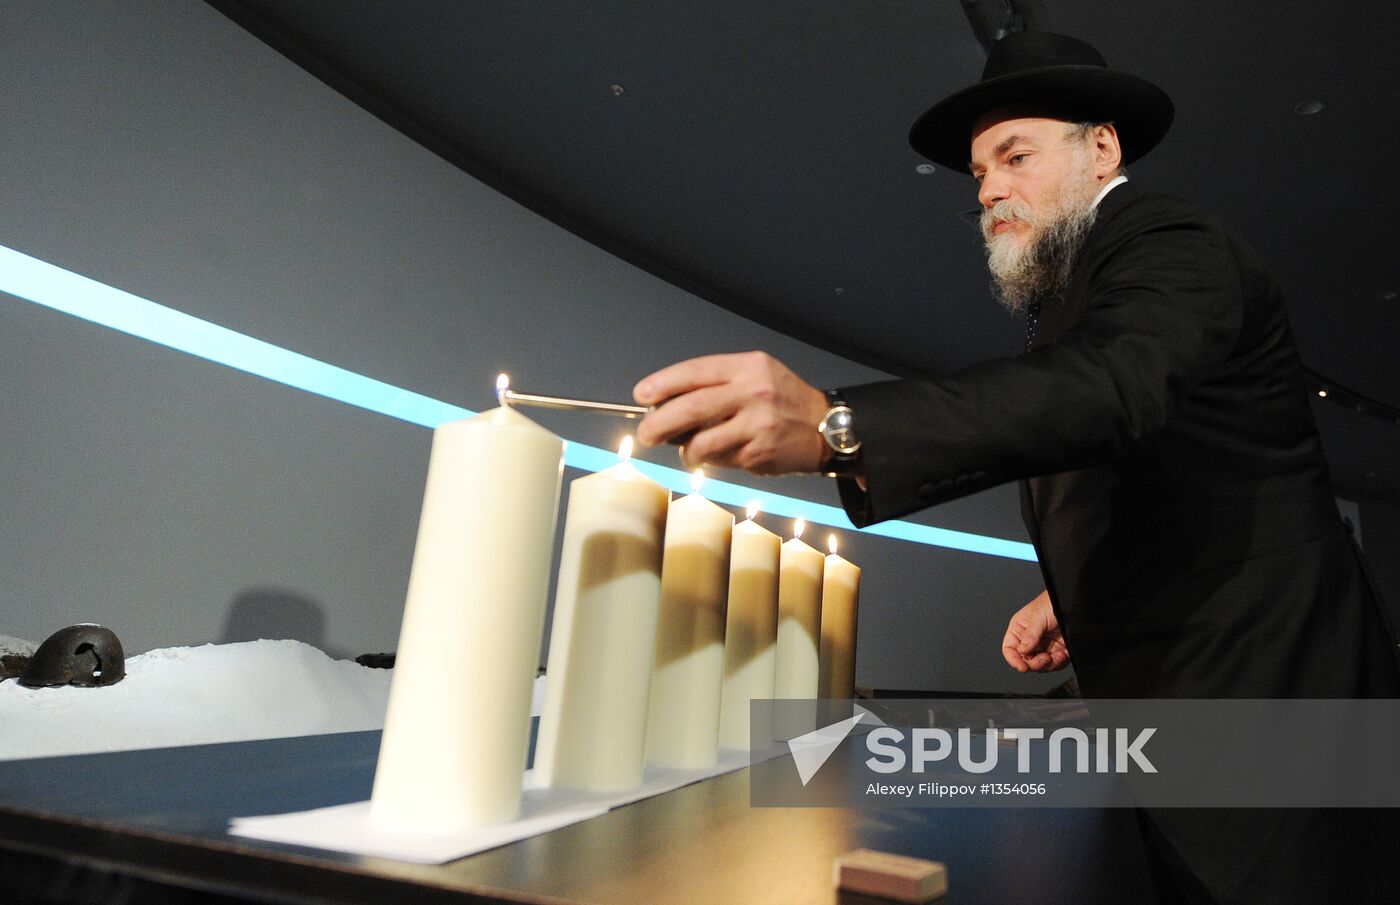 Lighting candles in memory of Holocaust victims